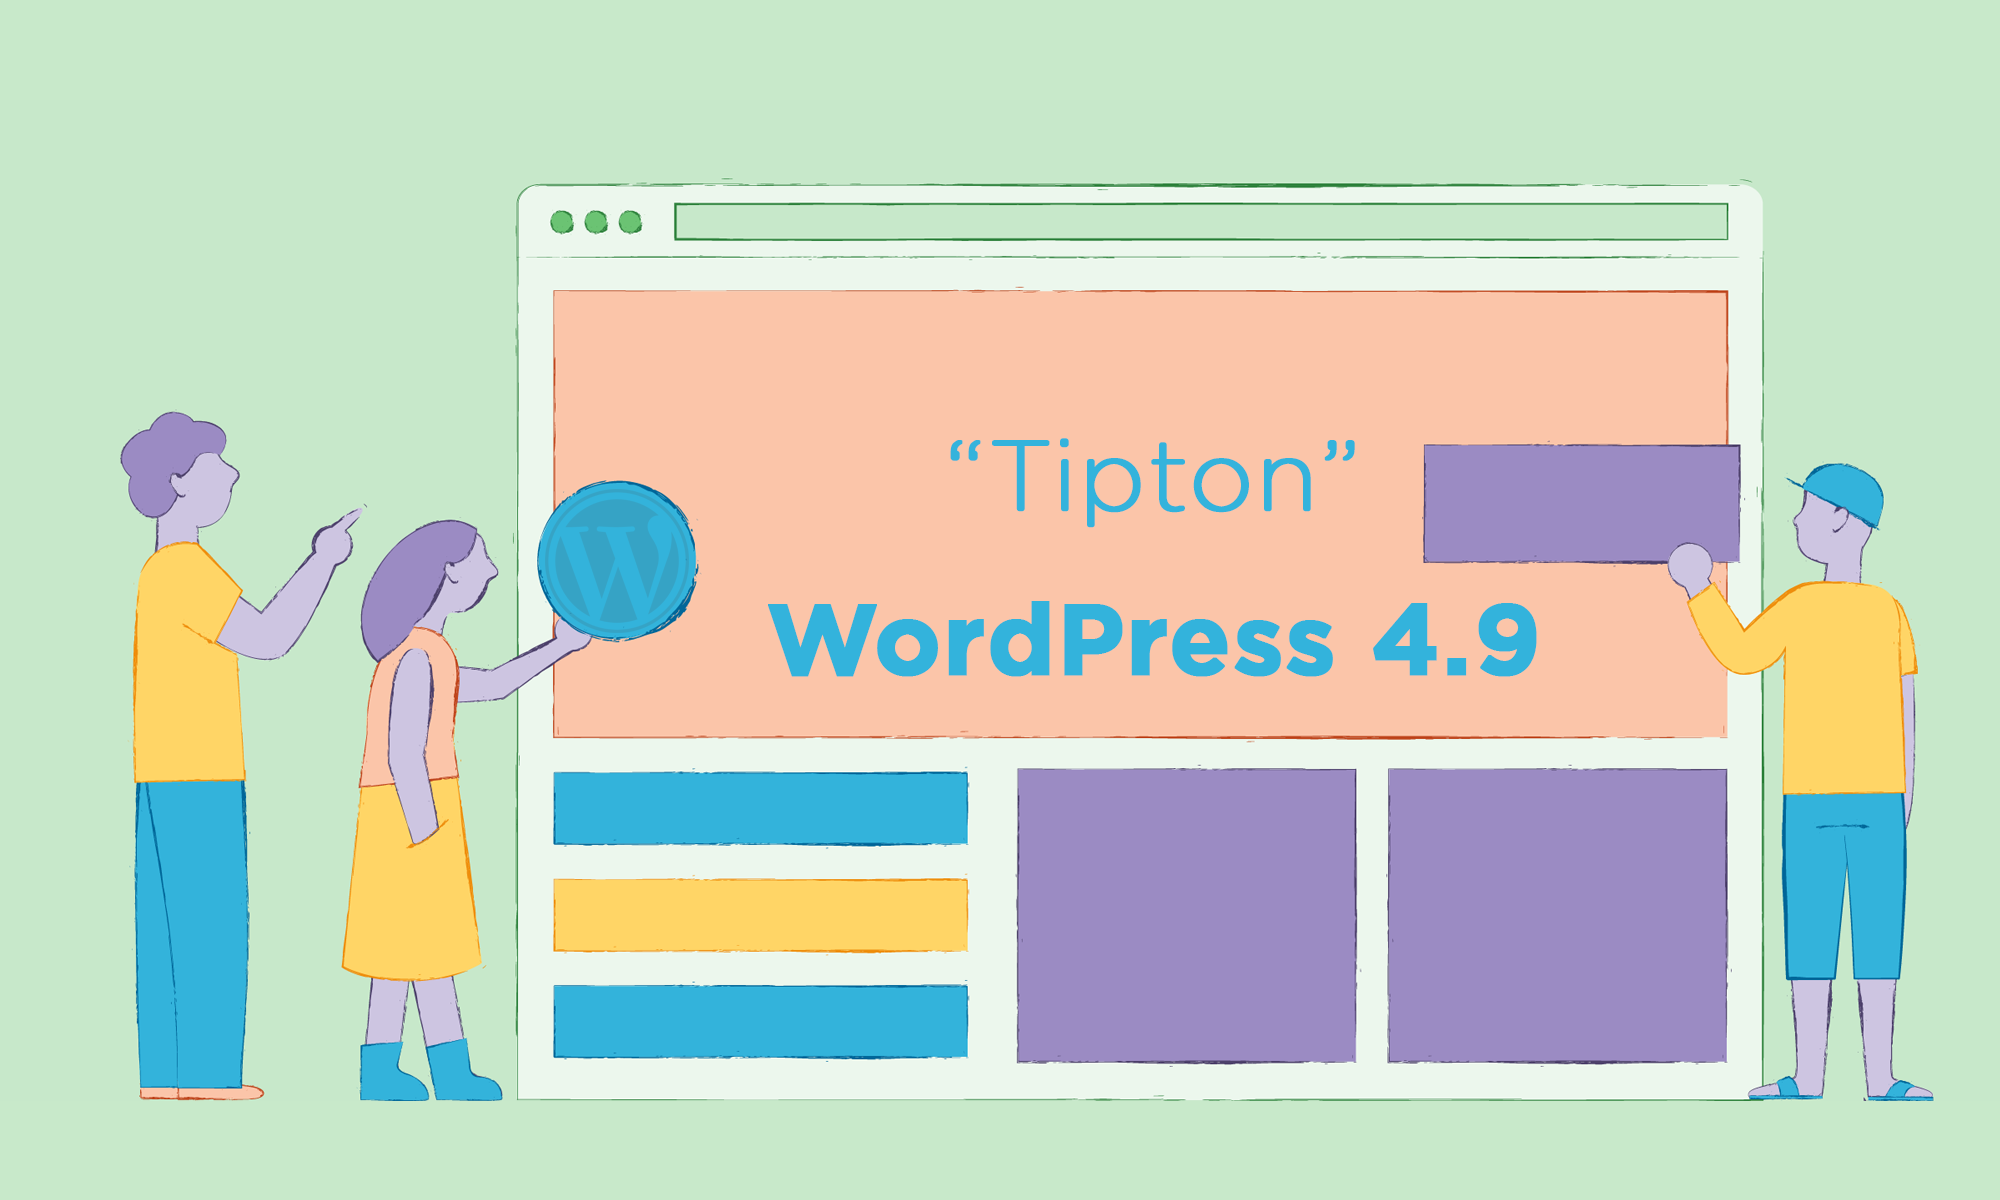 WordPress 4.9, “Tipton”, is released with drafts for the customizer